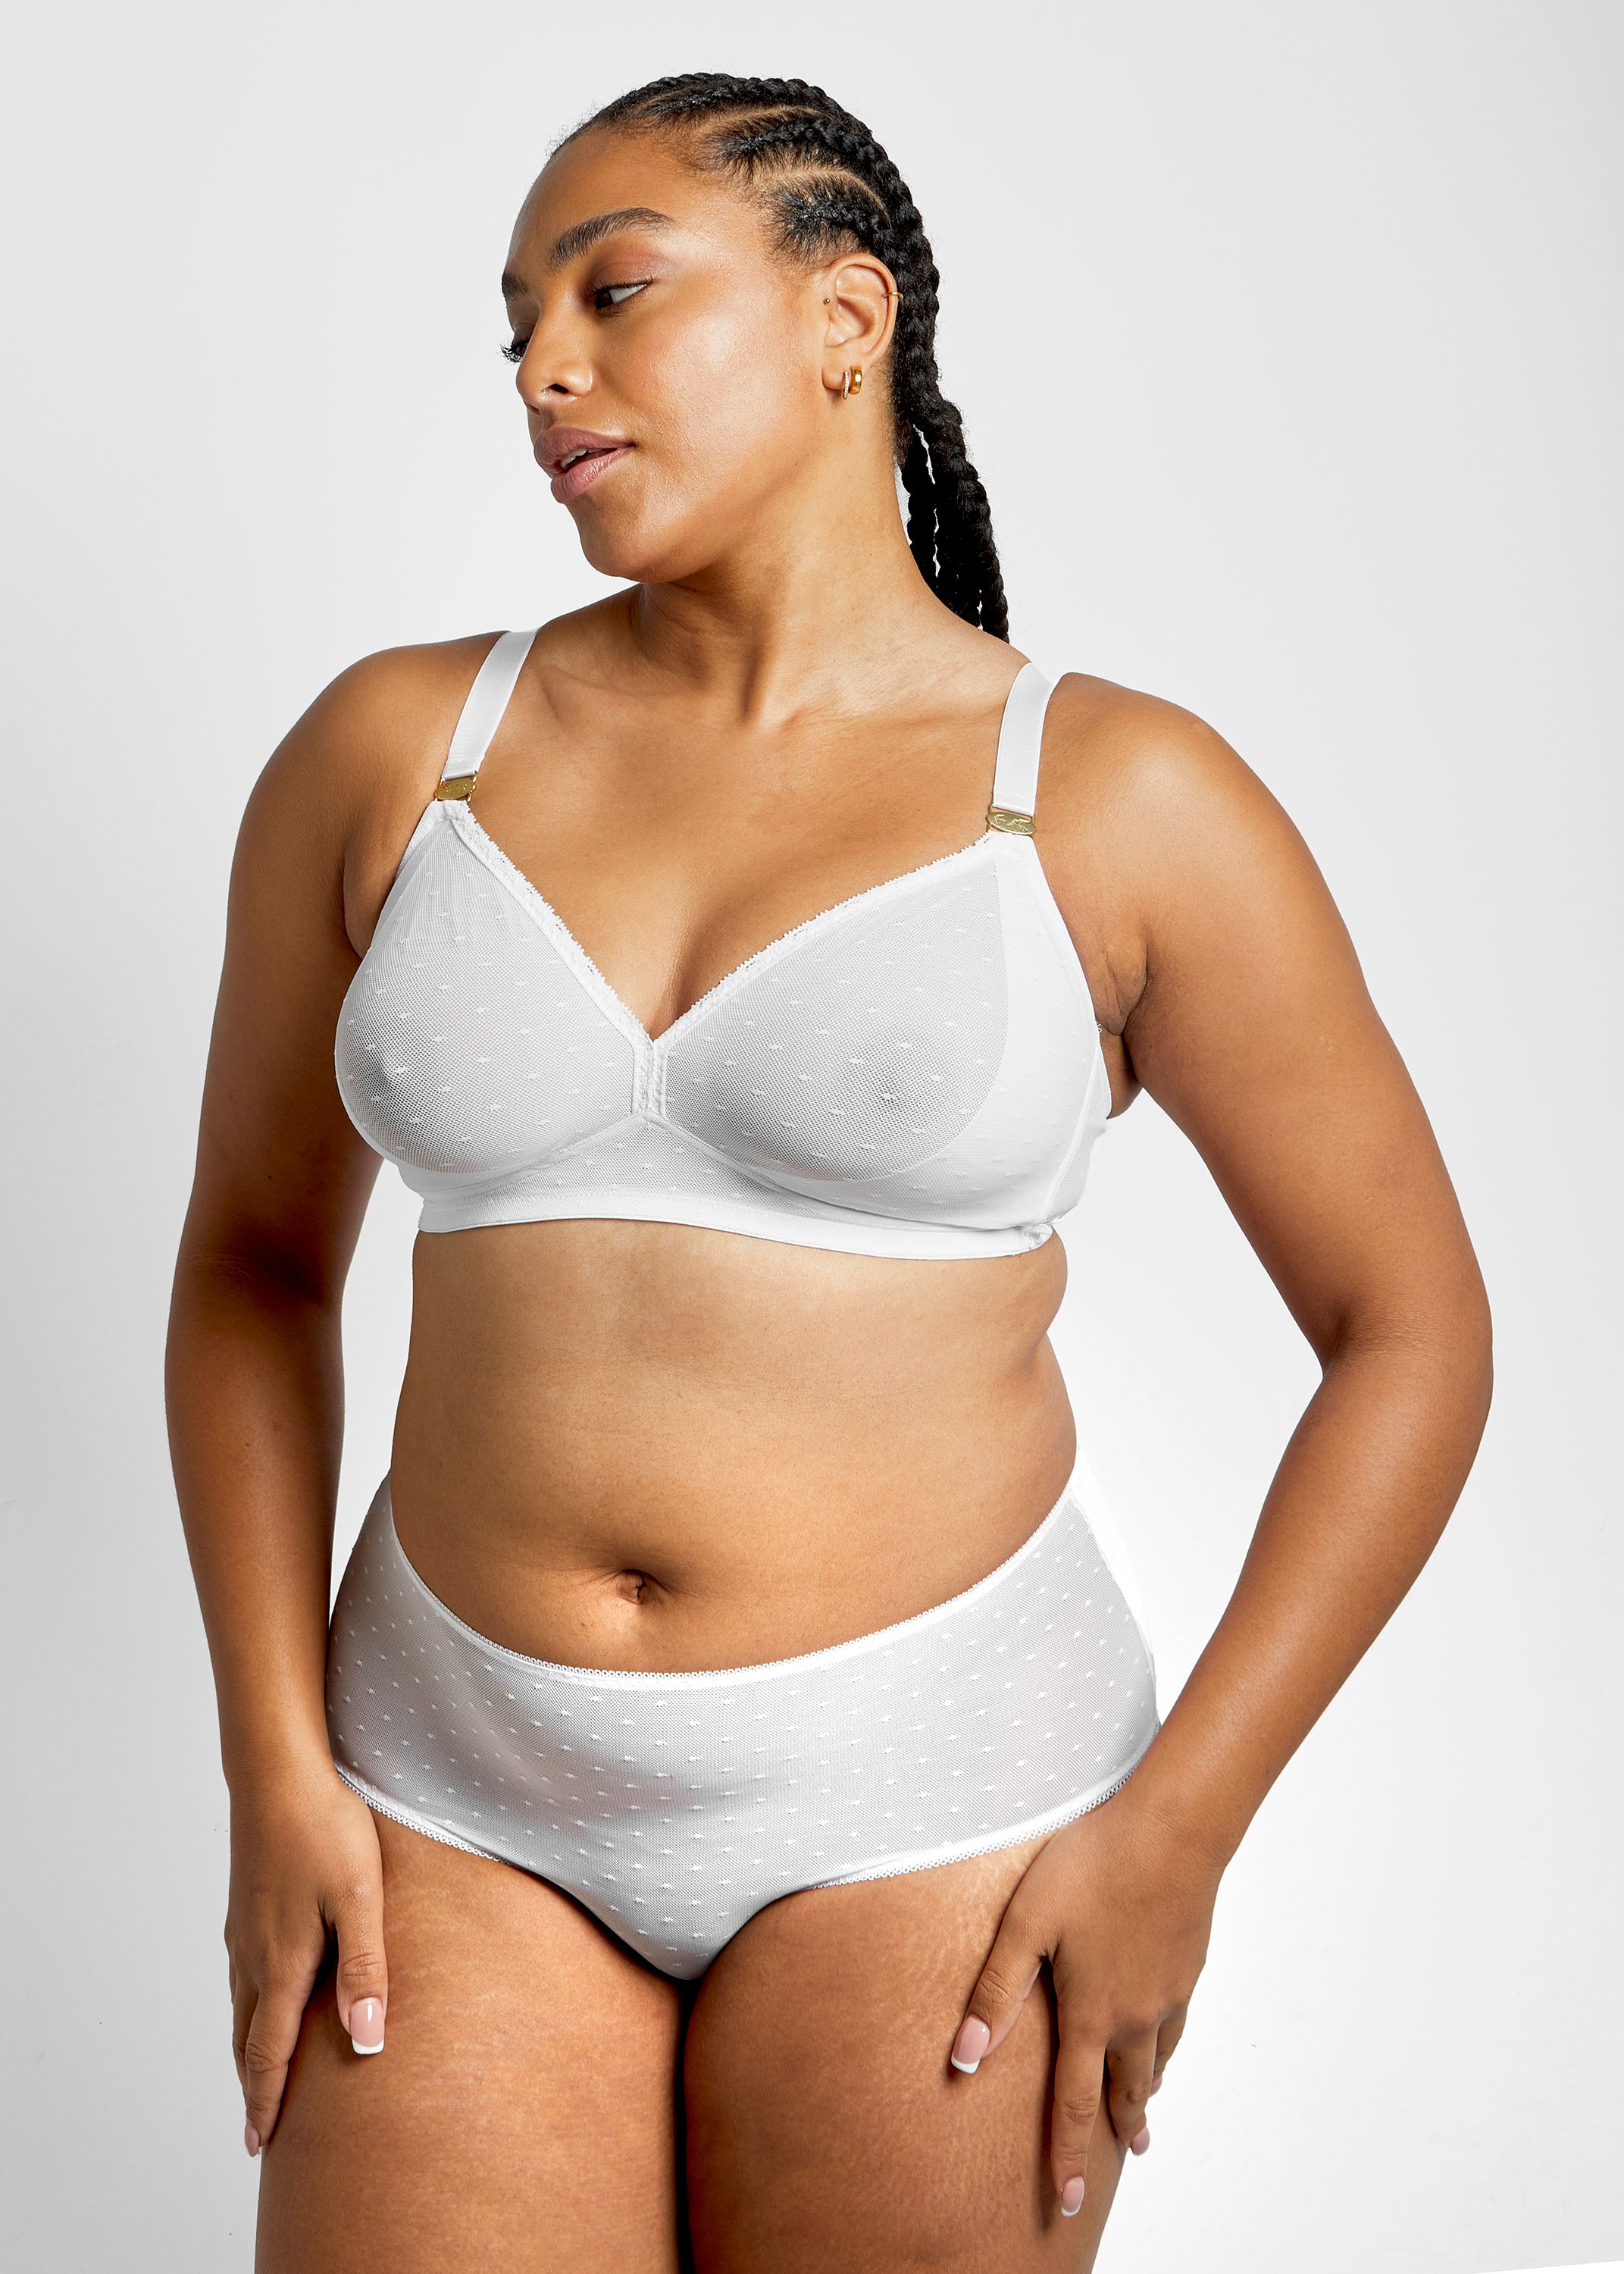 Peachaus soft non-wired bralette white recycled lace - Lotus Glacier White  - Ethical and Sustainable